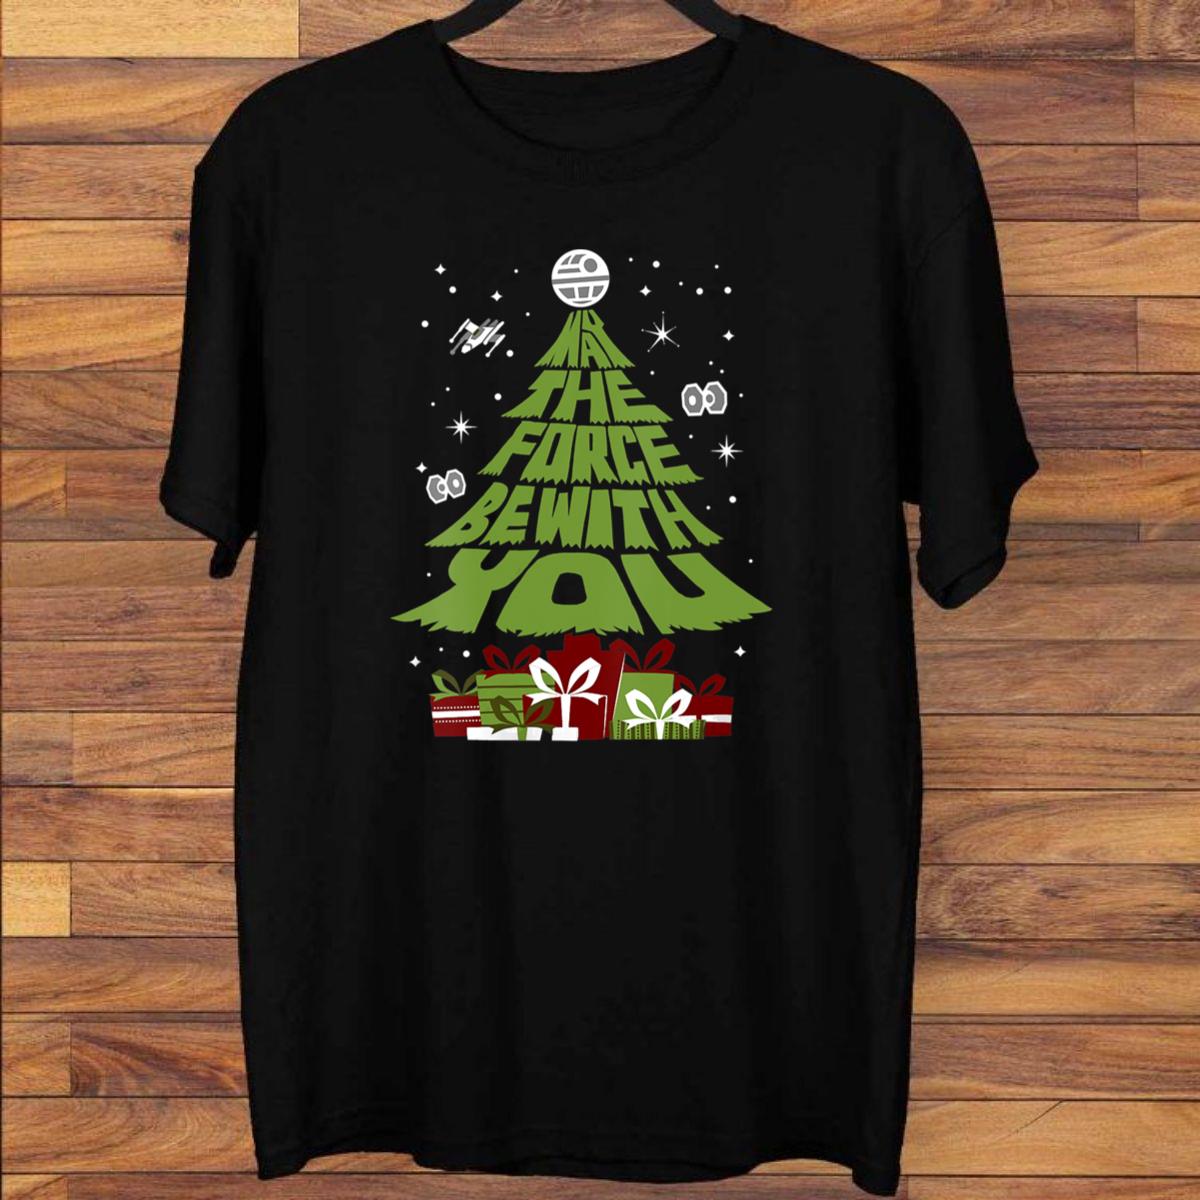 star wars may the force be with you christmas tree sweatshirt eizxp65225